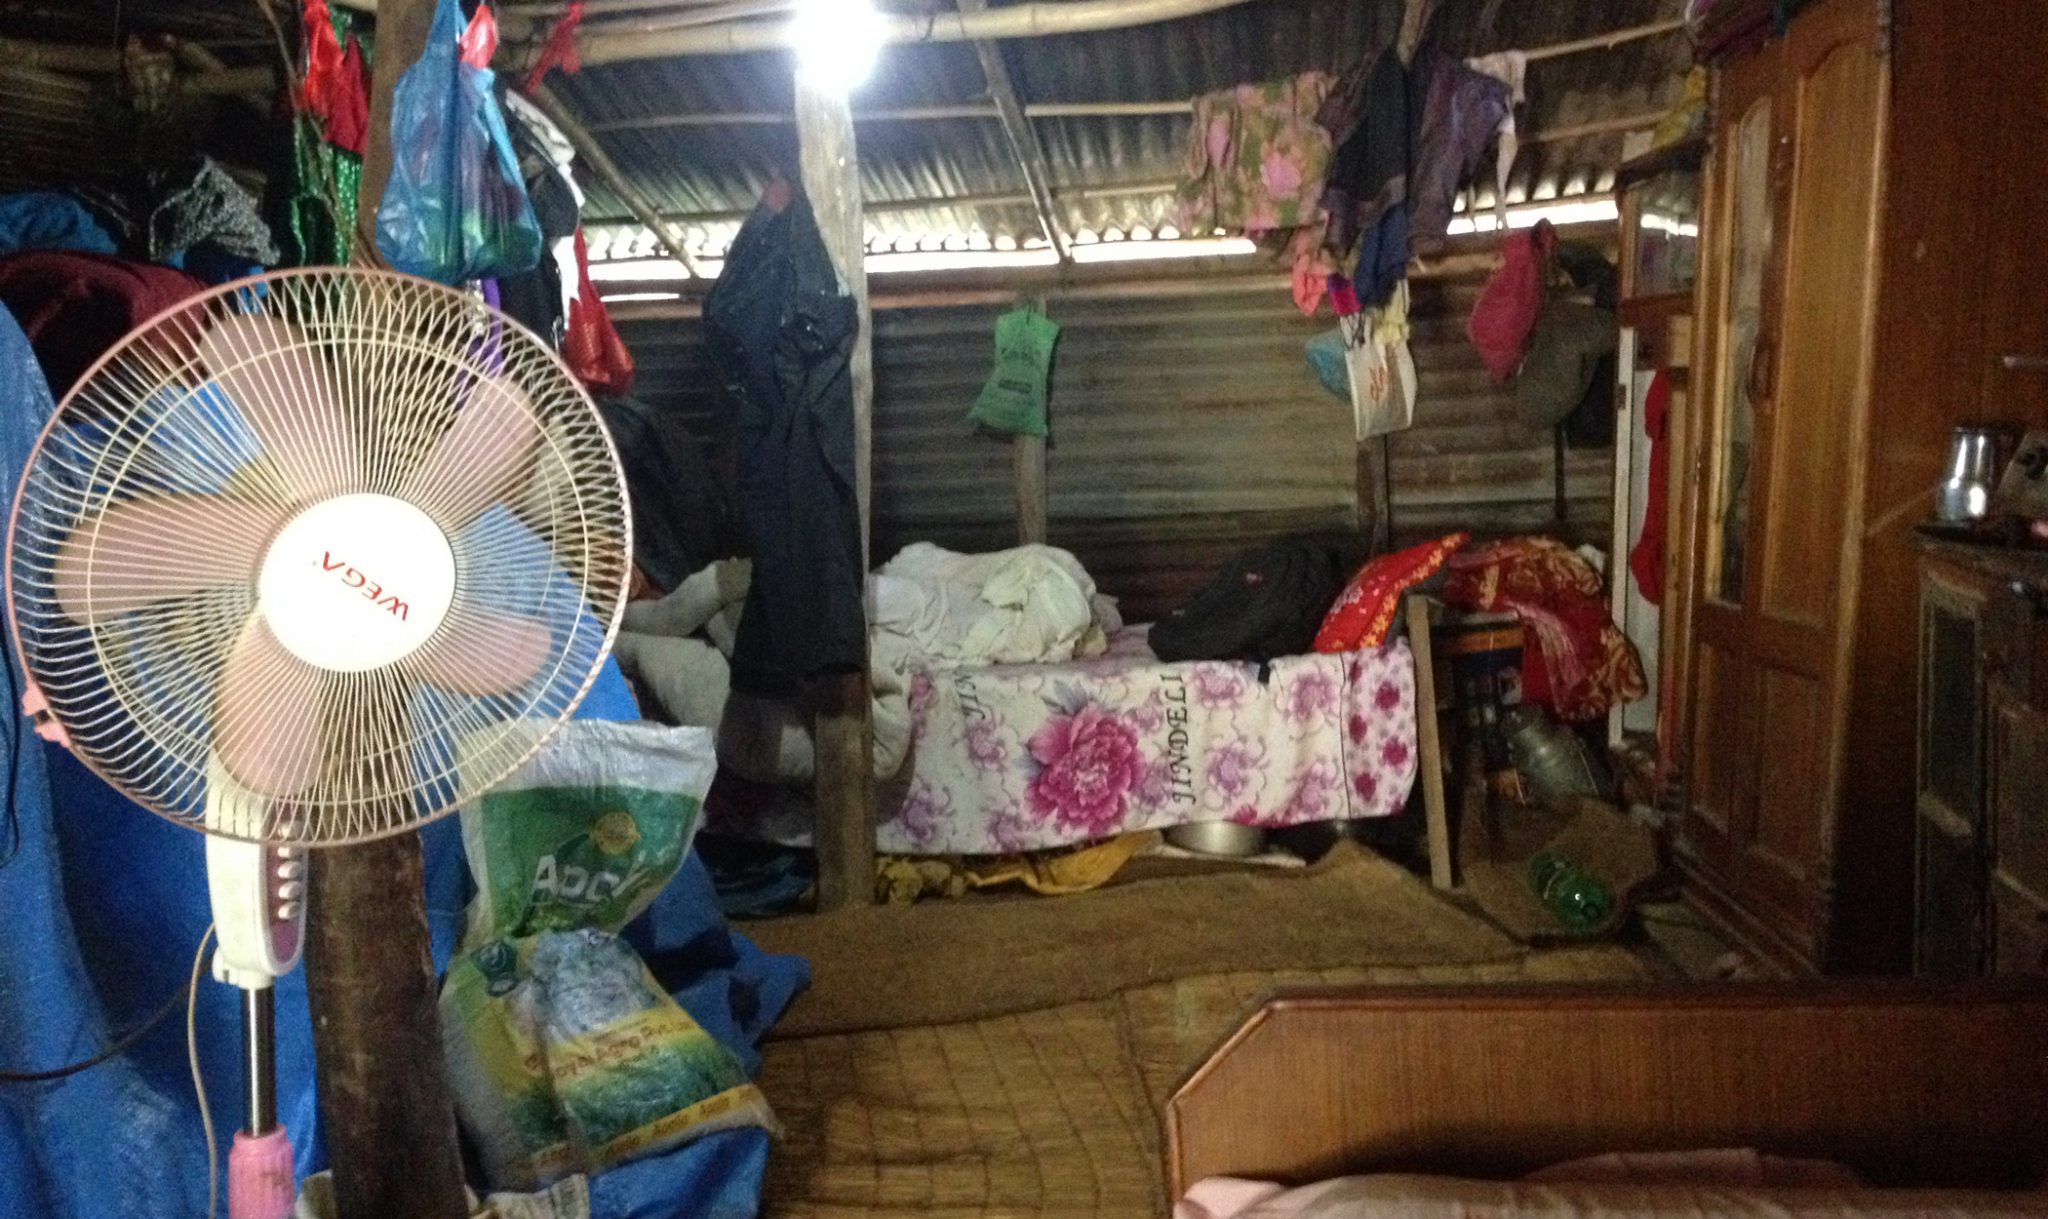 Inside the temporary shelter, which the residents built themselves from tin sheets and bamboo.